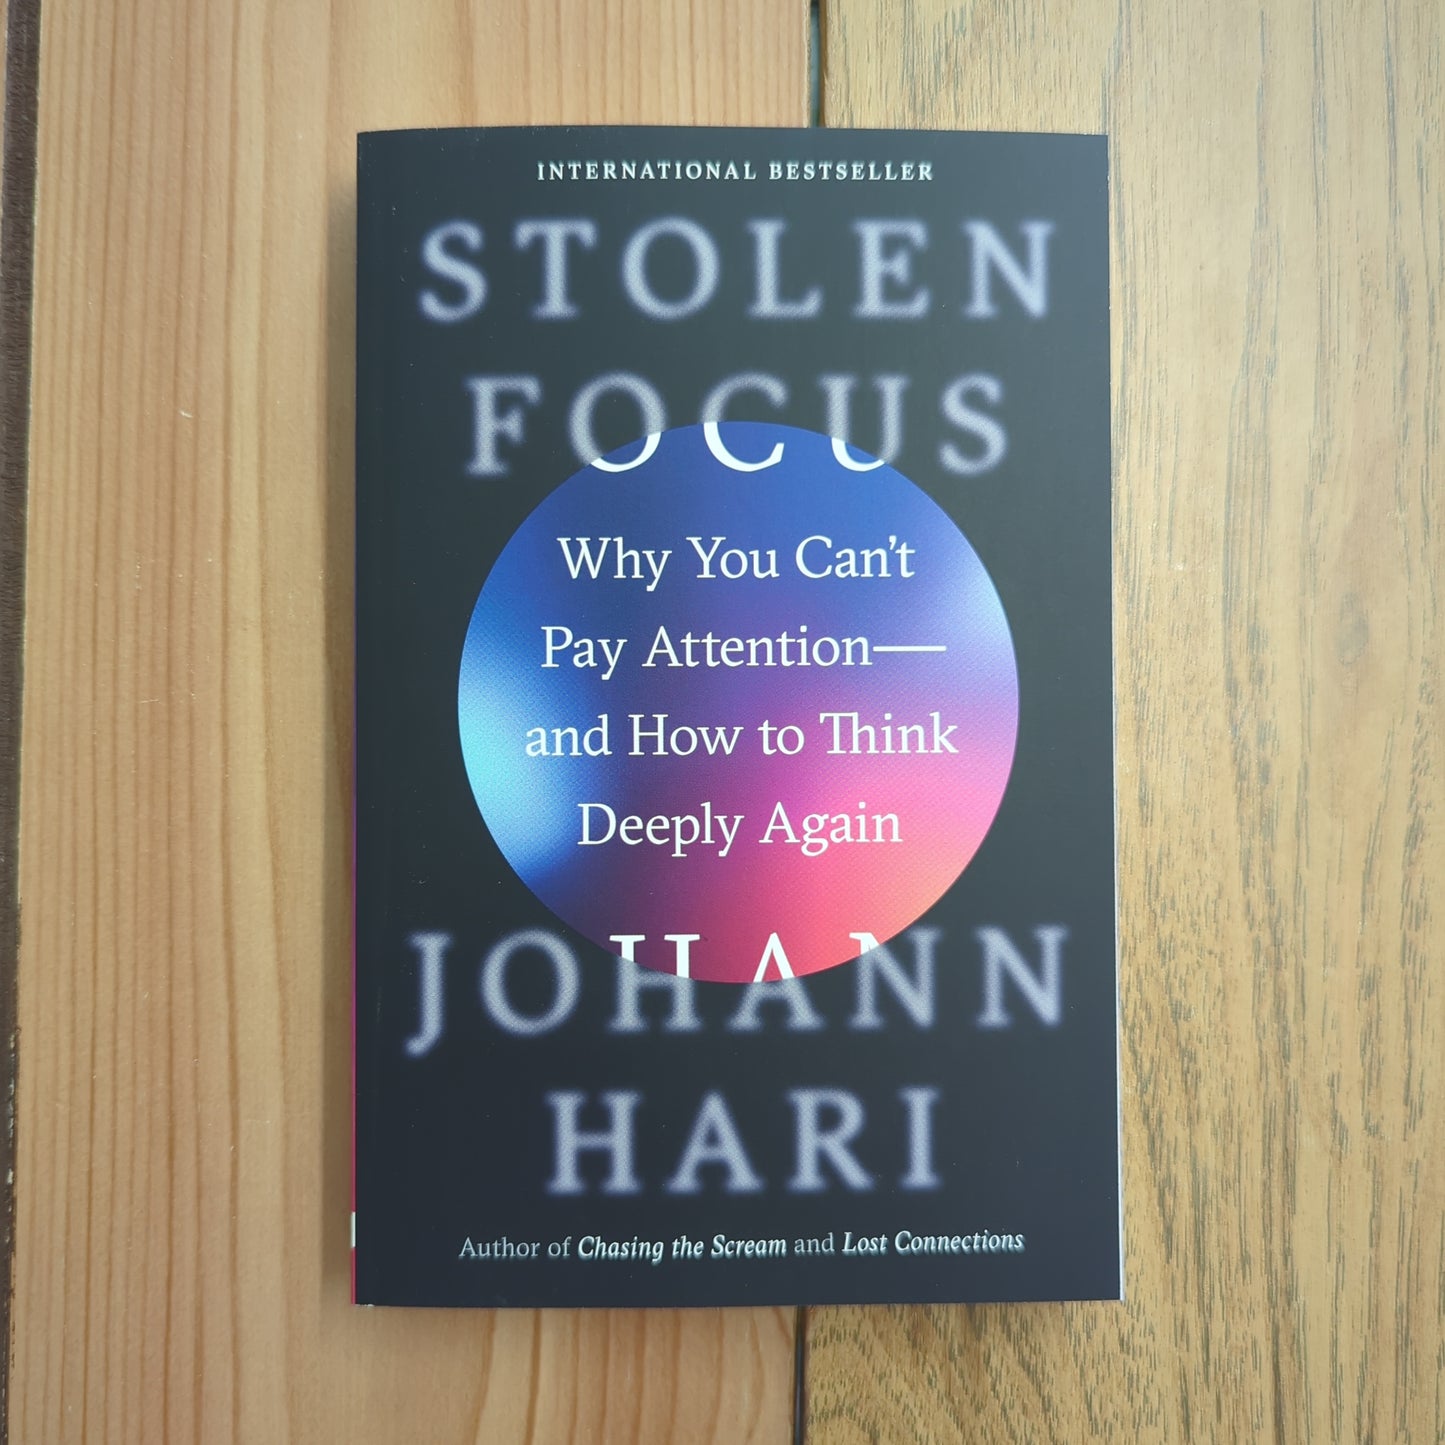 Stolen Focus: Why You Can't Pay Attention - and How to Think Deeply Again